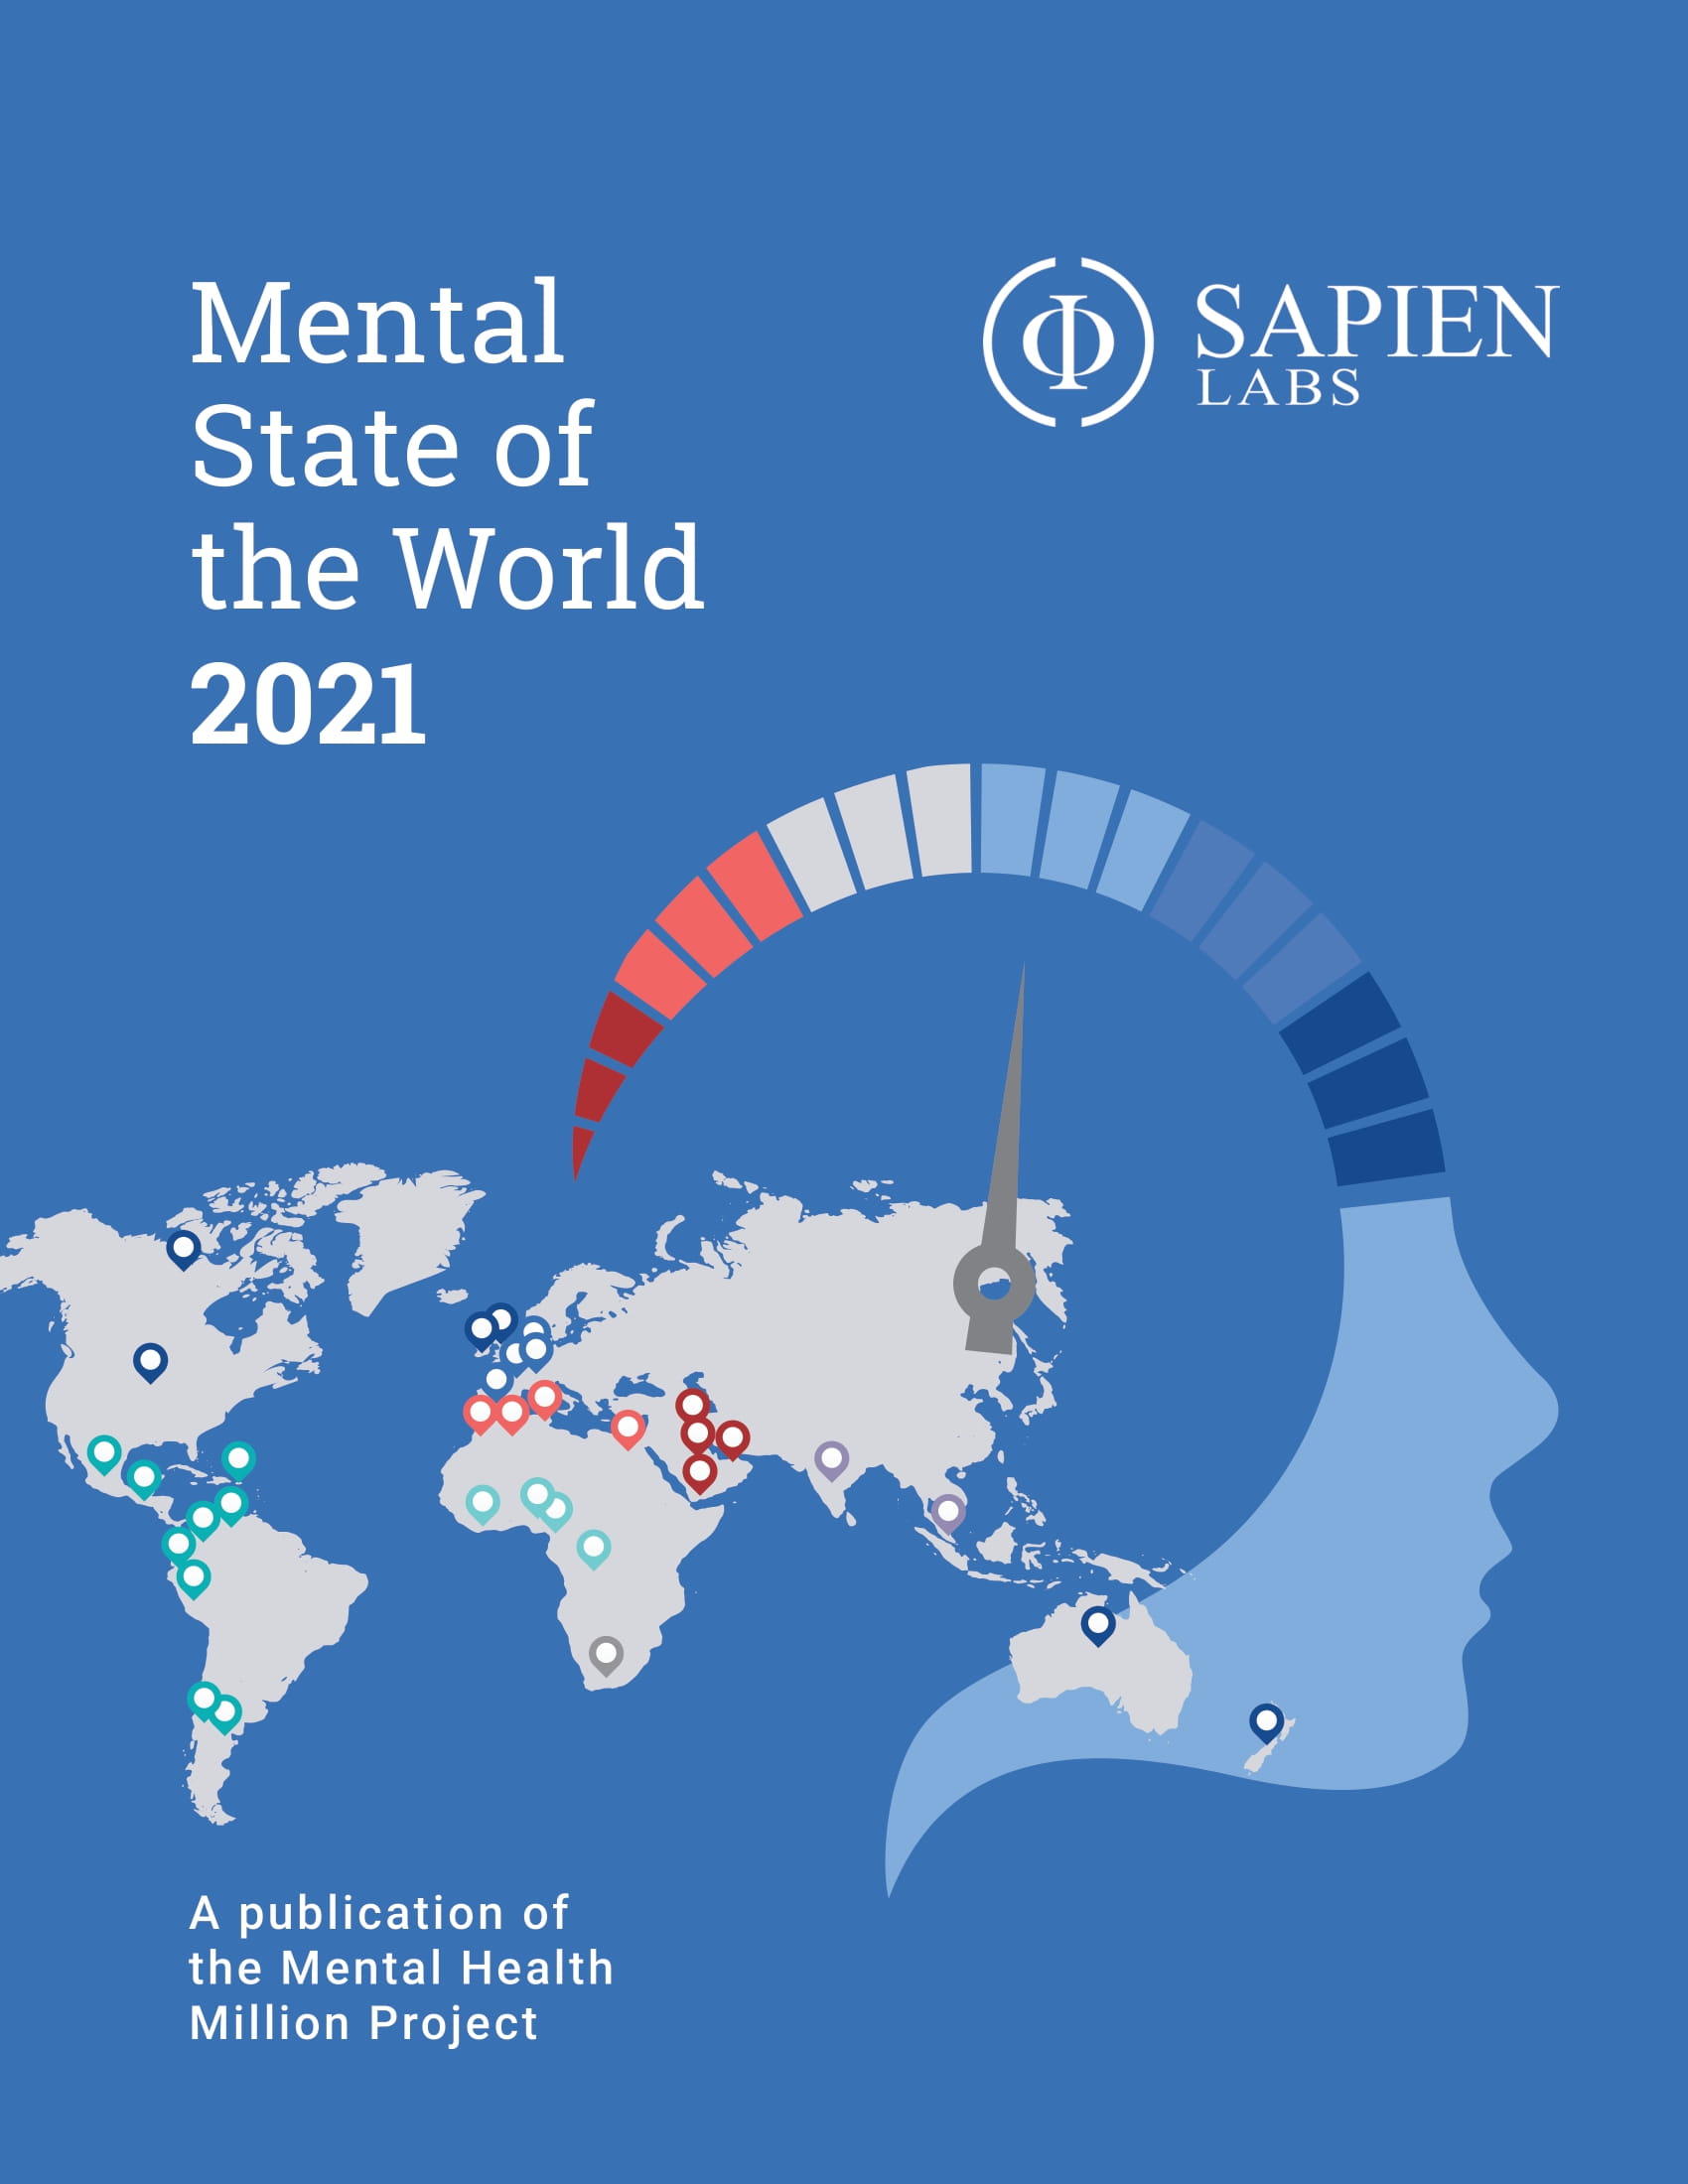 The Mental State Of The World Report 2021